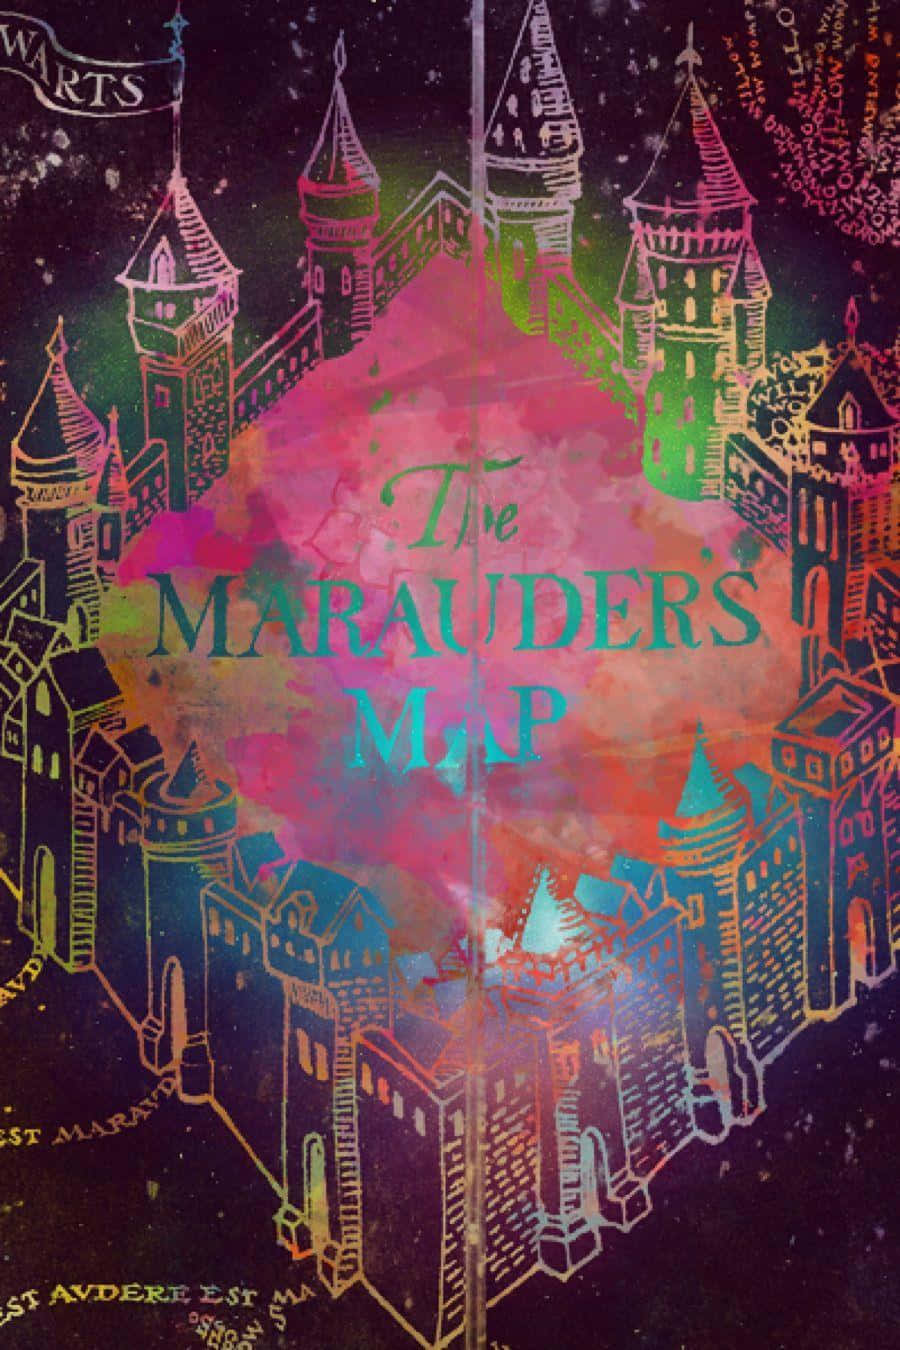 "Explore the magical corridors of Hogwarts with The Marauder's Map!" Wallpaper